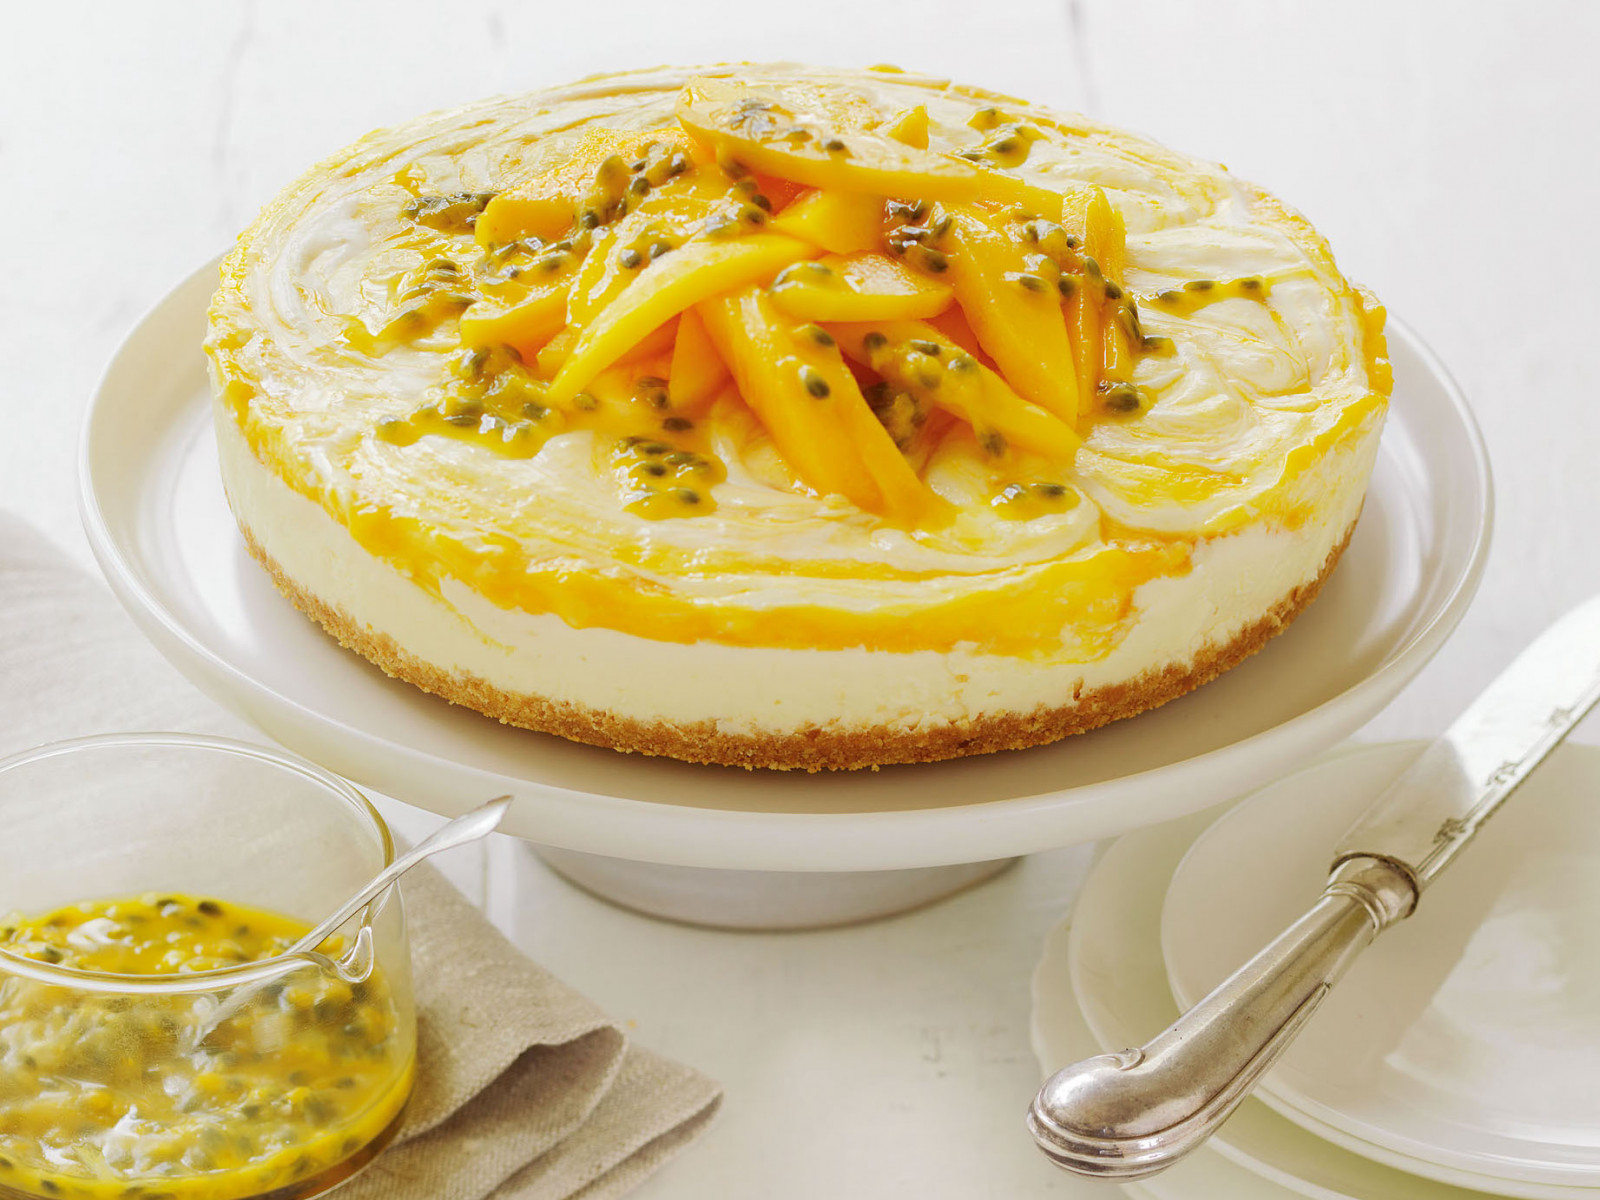 Mango & White Chocolate Cheesecake | Step by Step Picture Recipe